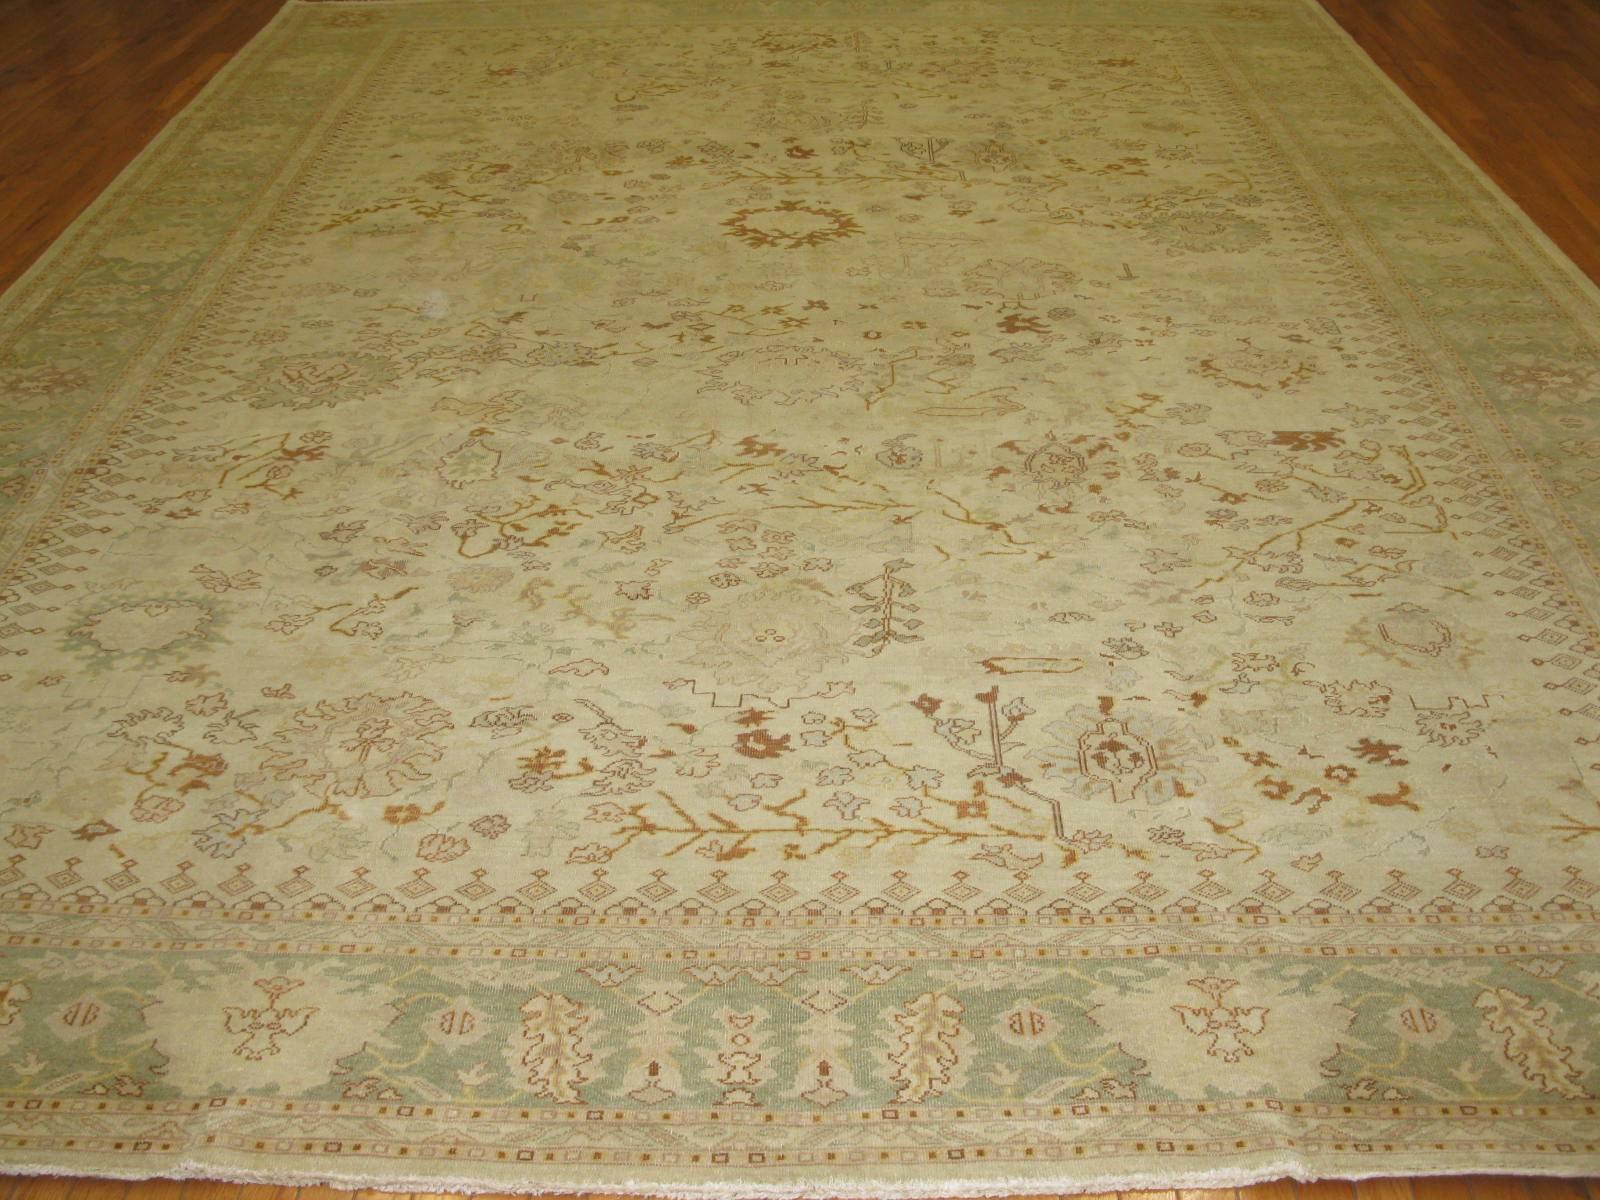 This is a beautiful antique washed hand-knotted rug made in Egypt with an all-over pattern Agra design. The rug has a very fine weave with a great antique patina. It measures 11' x 14' 9''.